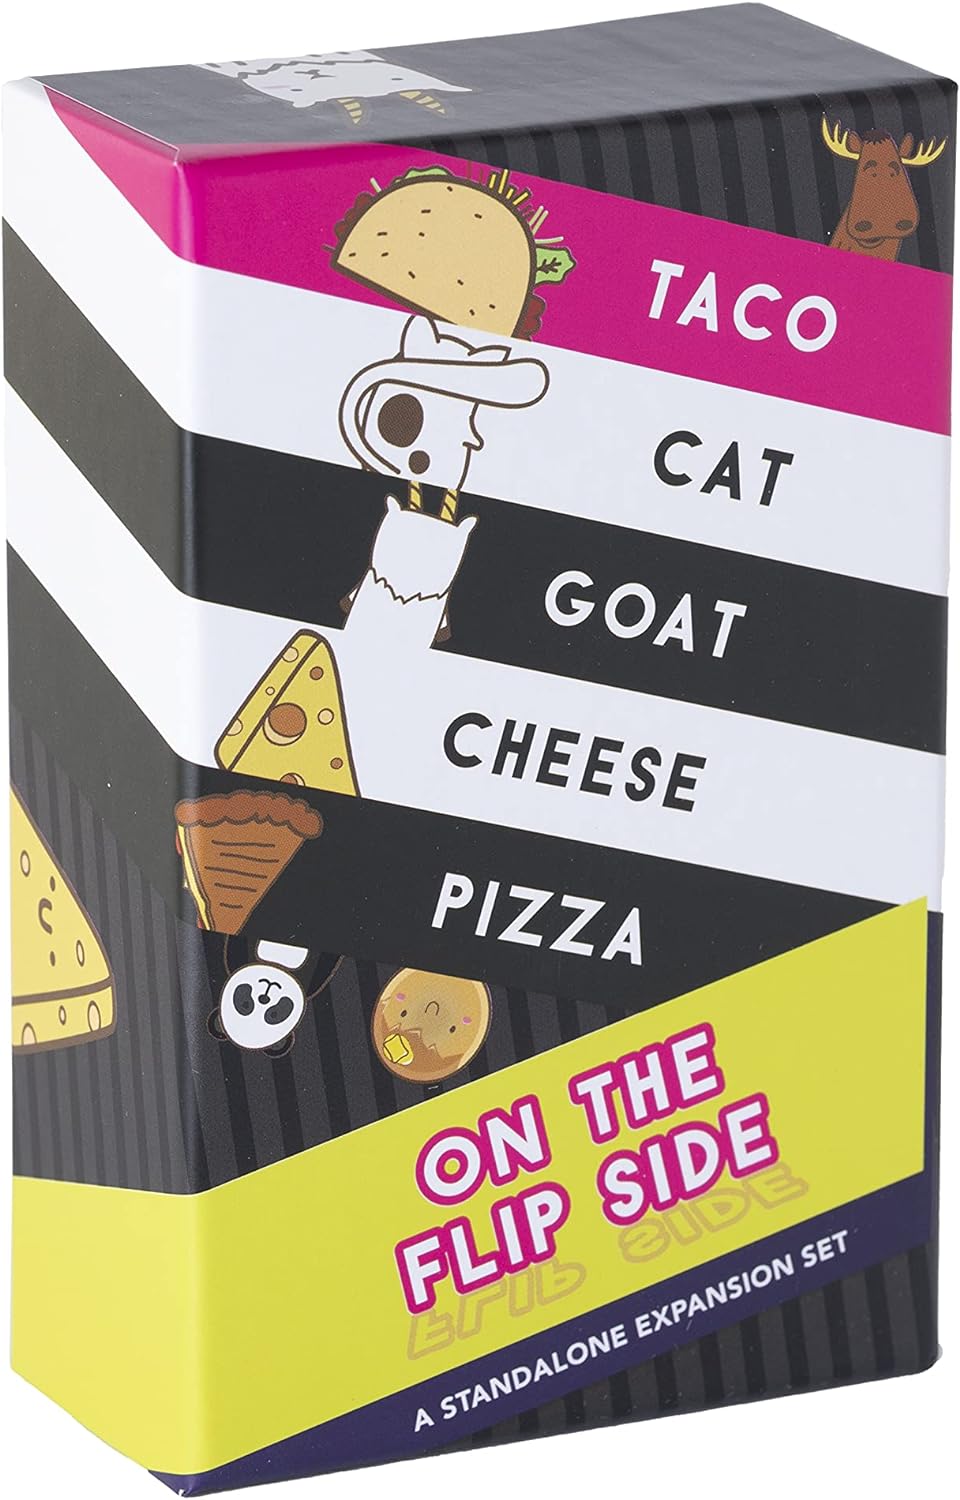 Dolphin Hat Games Taco Cat Goat Cheese Pizza On Flip Side, Party Board Game